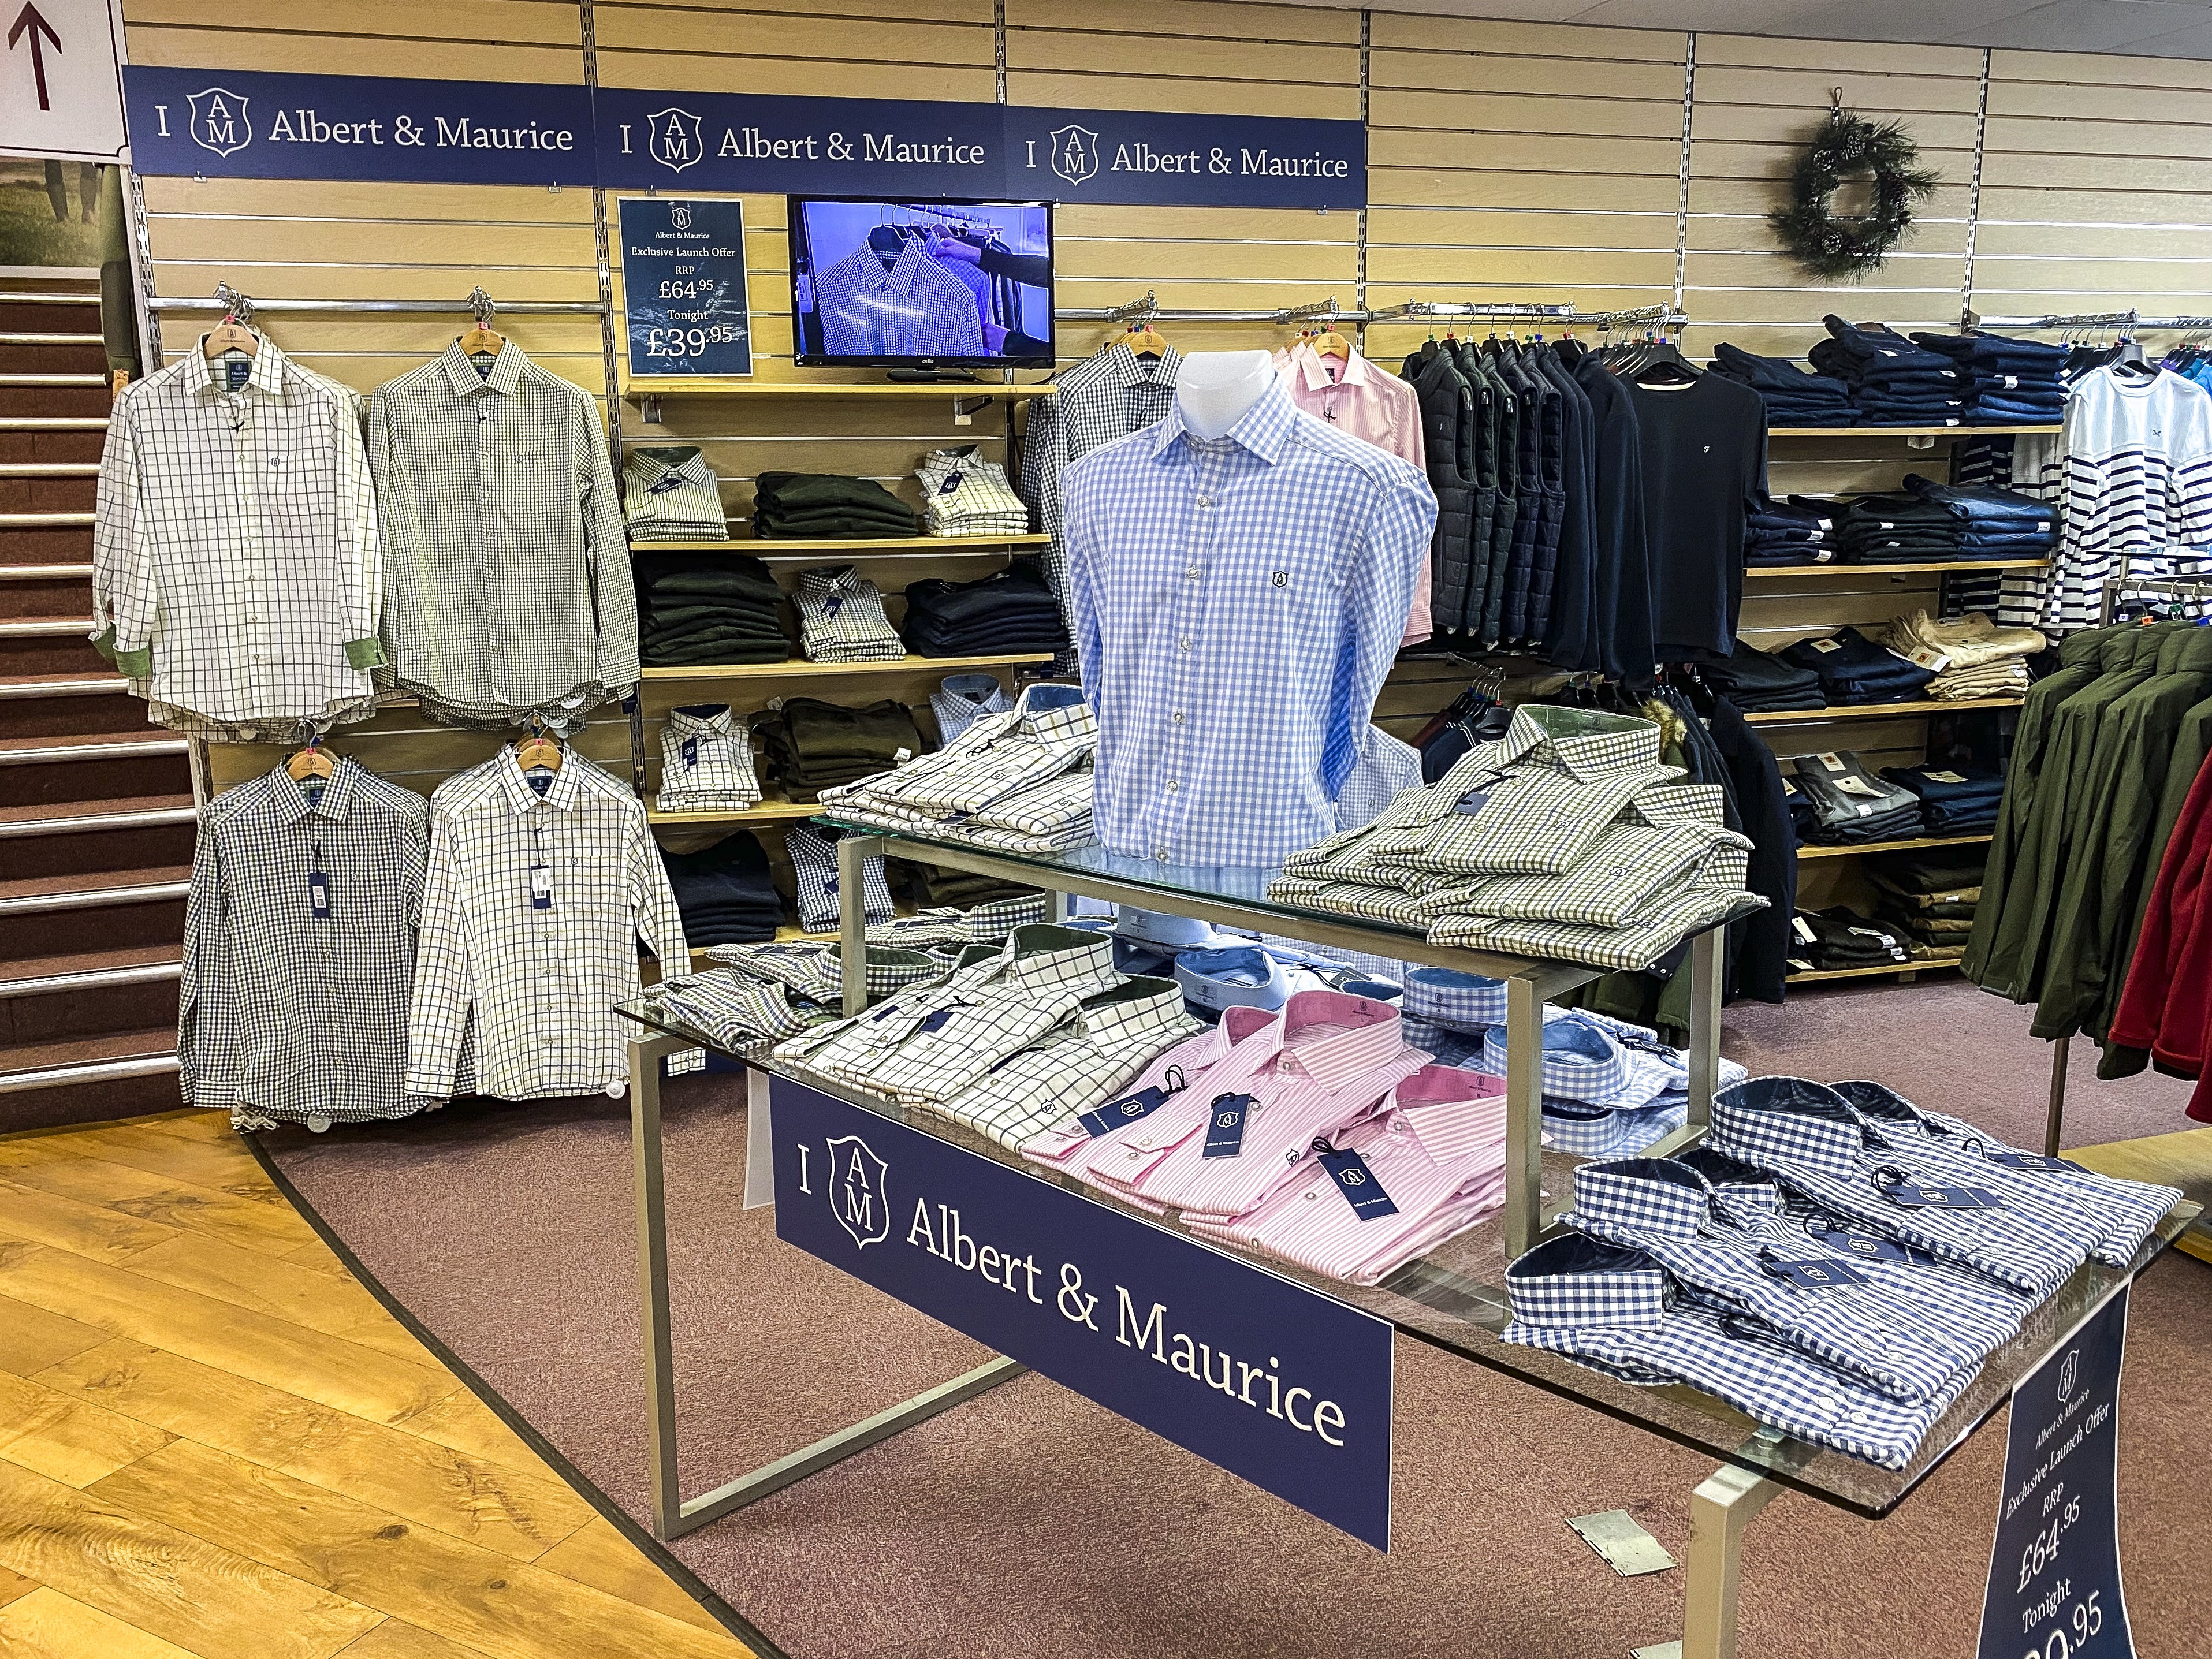 The shirts were displayed in Philip Morris & Son, our local stockist in Herefordshire